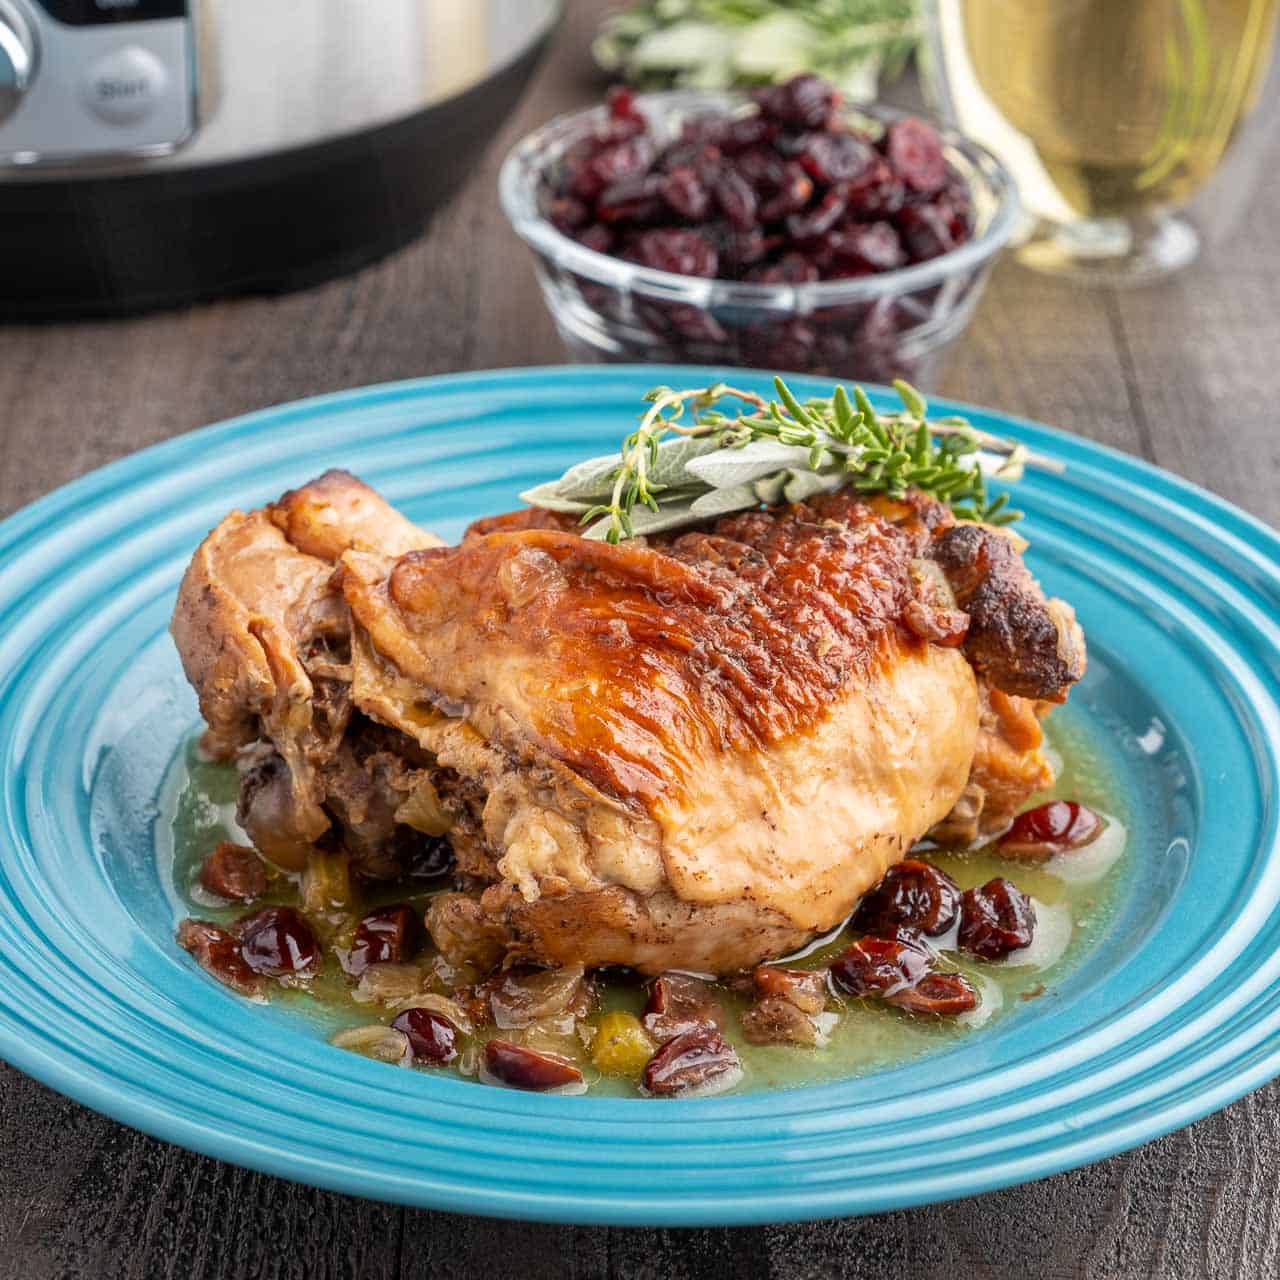 A turkey thigh on a bed of cranberries and onions and sauce, with a sprig of thyme and sage on top, and a cup of cranberries in the background